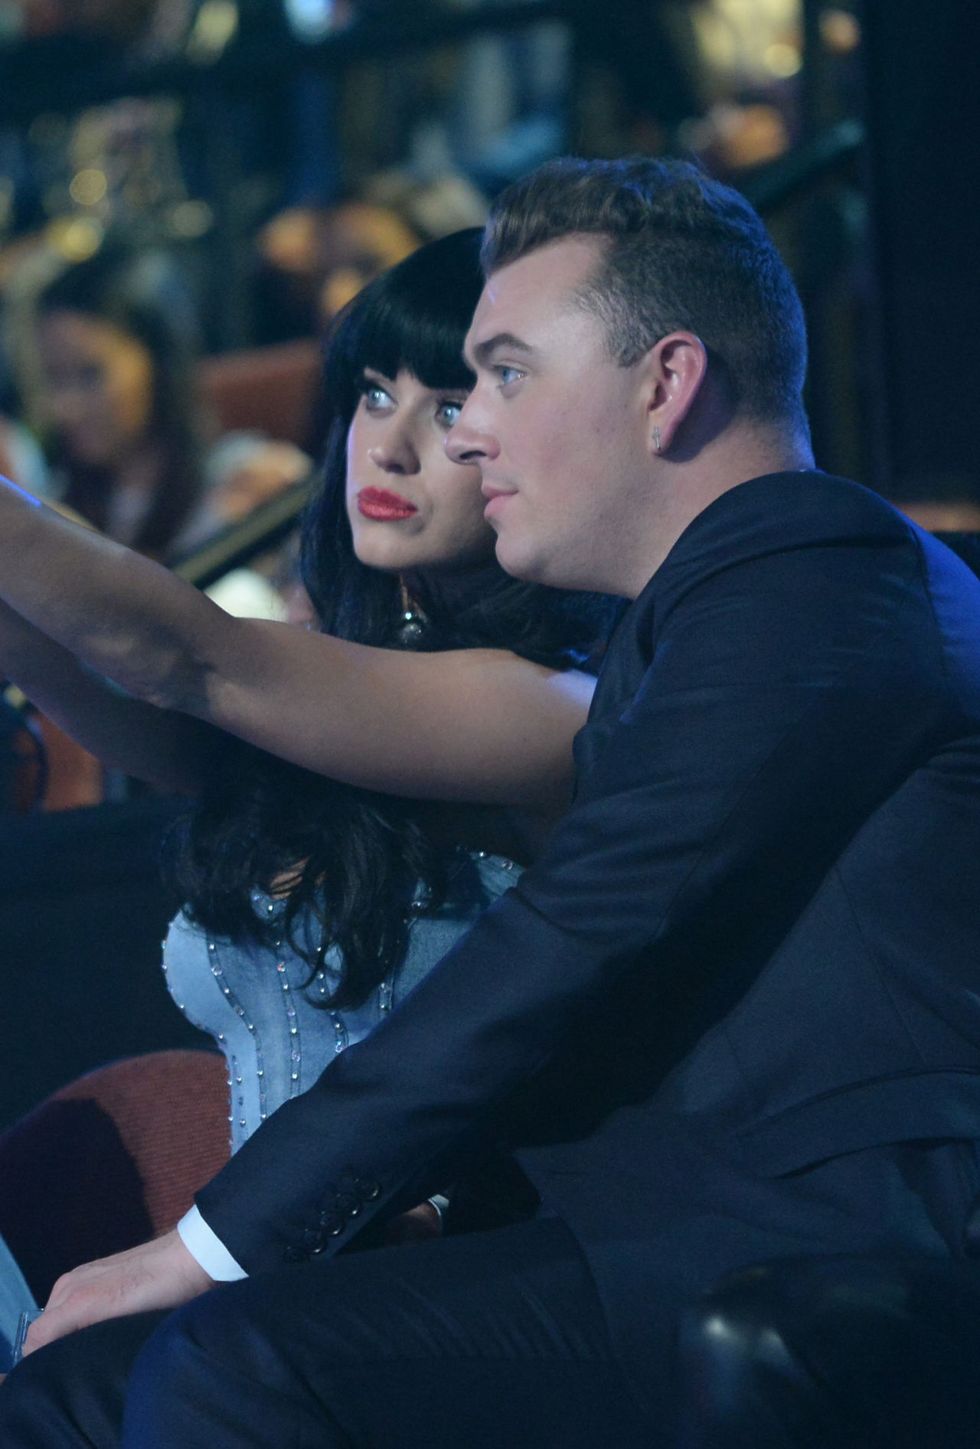 INGLEWOOD, CA - AUGUST 24: Recording artists Katy Perry (L) and Sam Smith take a selfie at the 2014 MTV Video Music Awards at The Forum on August 24, 2014 in Inglewood, California.  (Photo by Jeff Kravitz/MTV1415/FilmMagic)